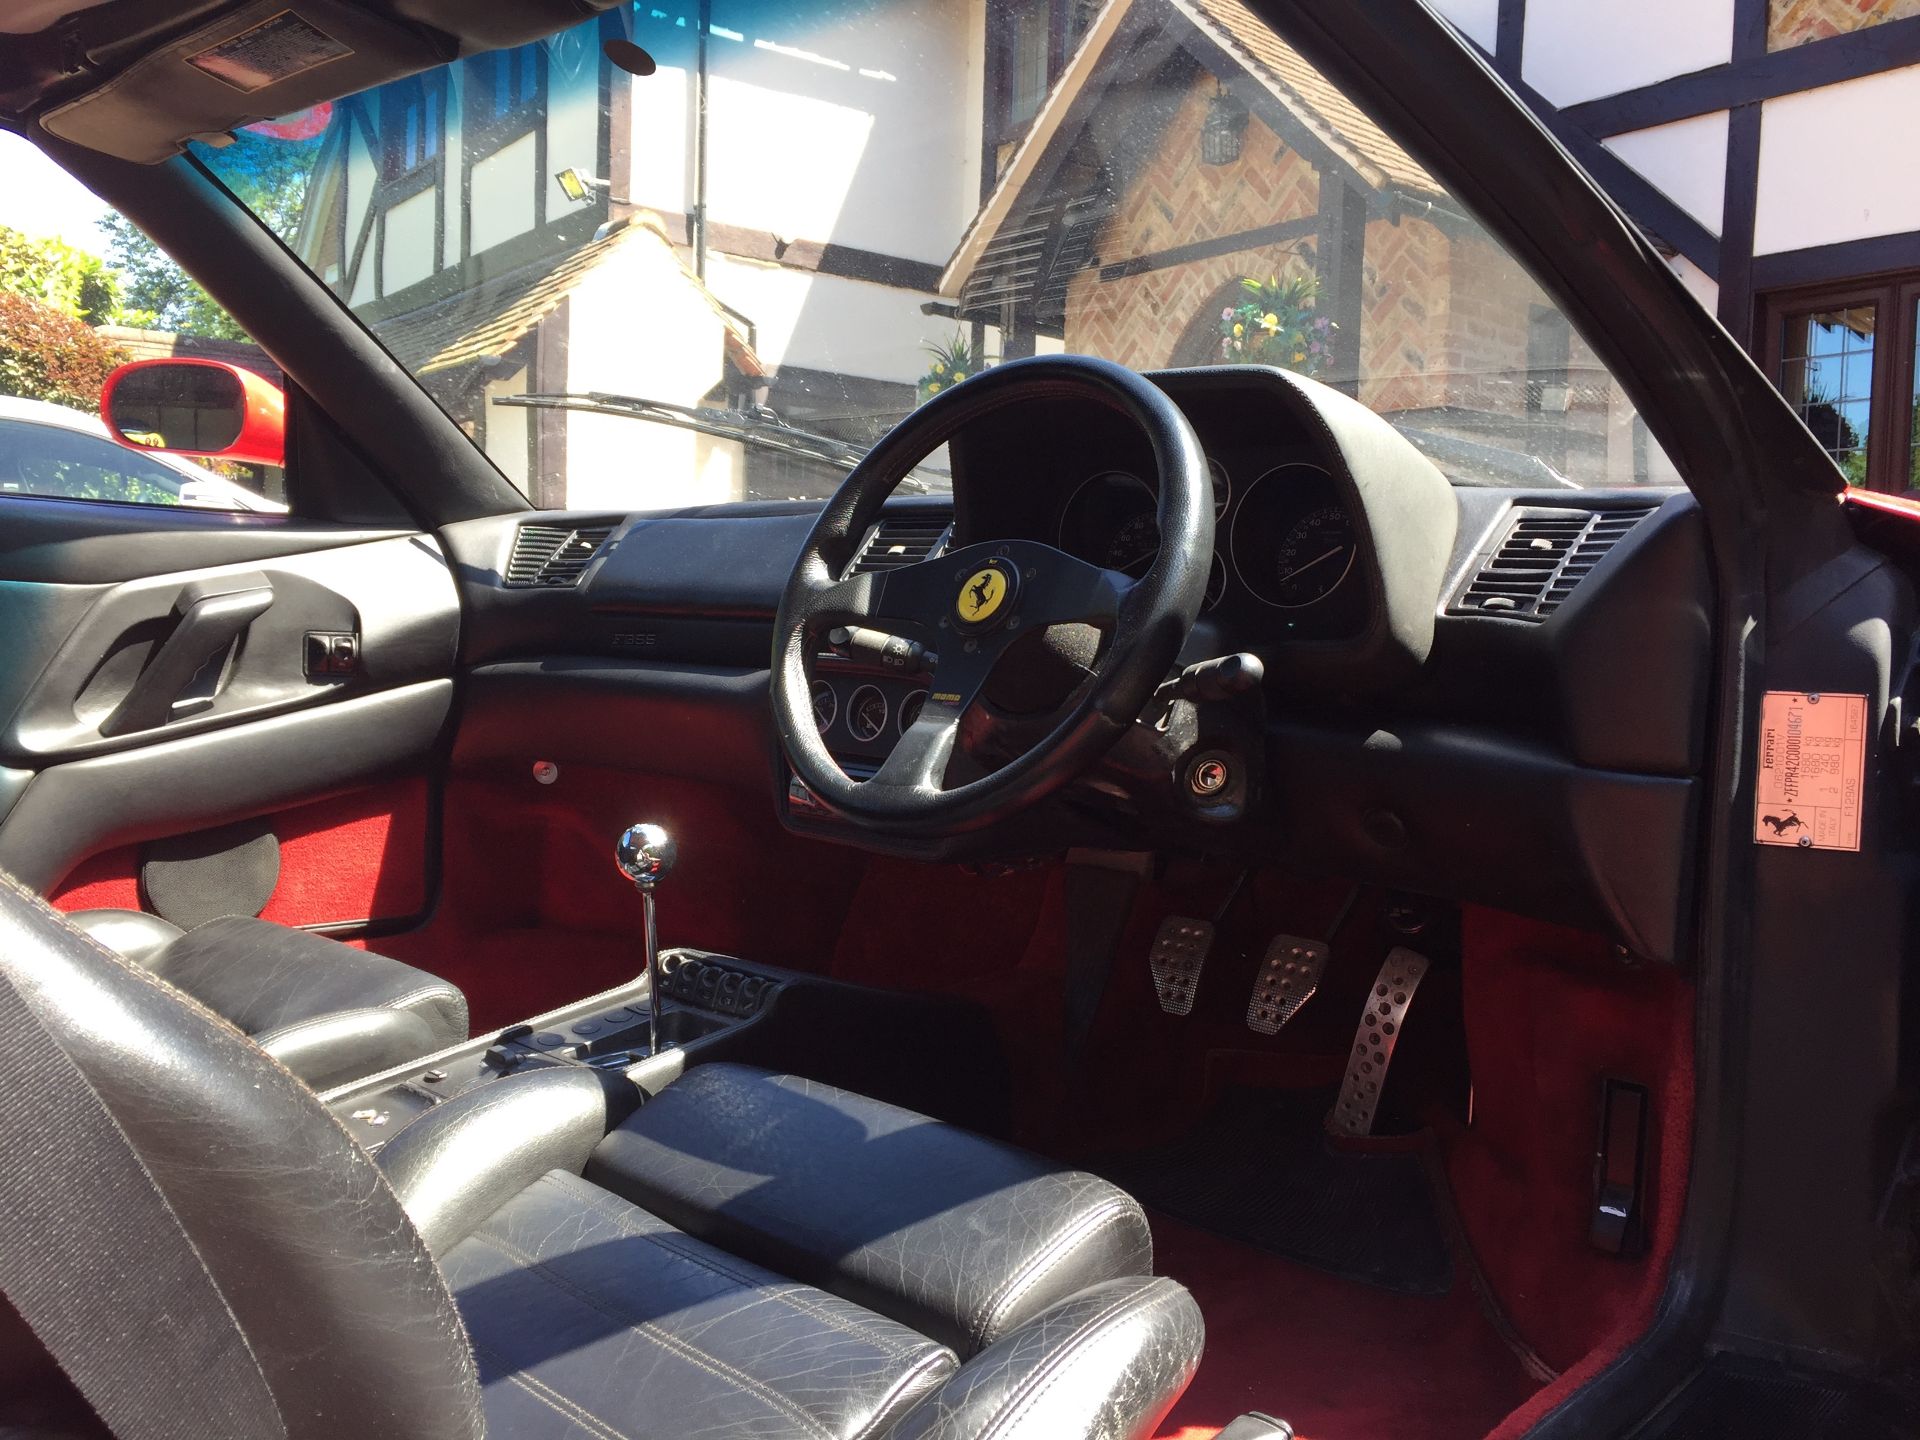 RHD UK Supplied Ferrari F355 GTS with a Manual gearbox - Image 7 of 9